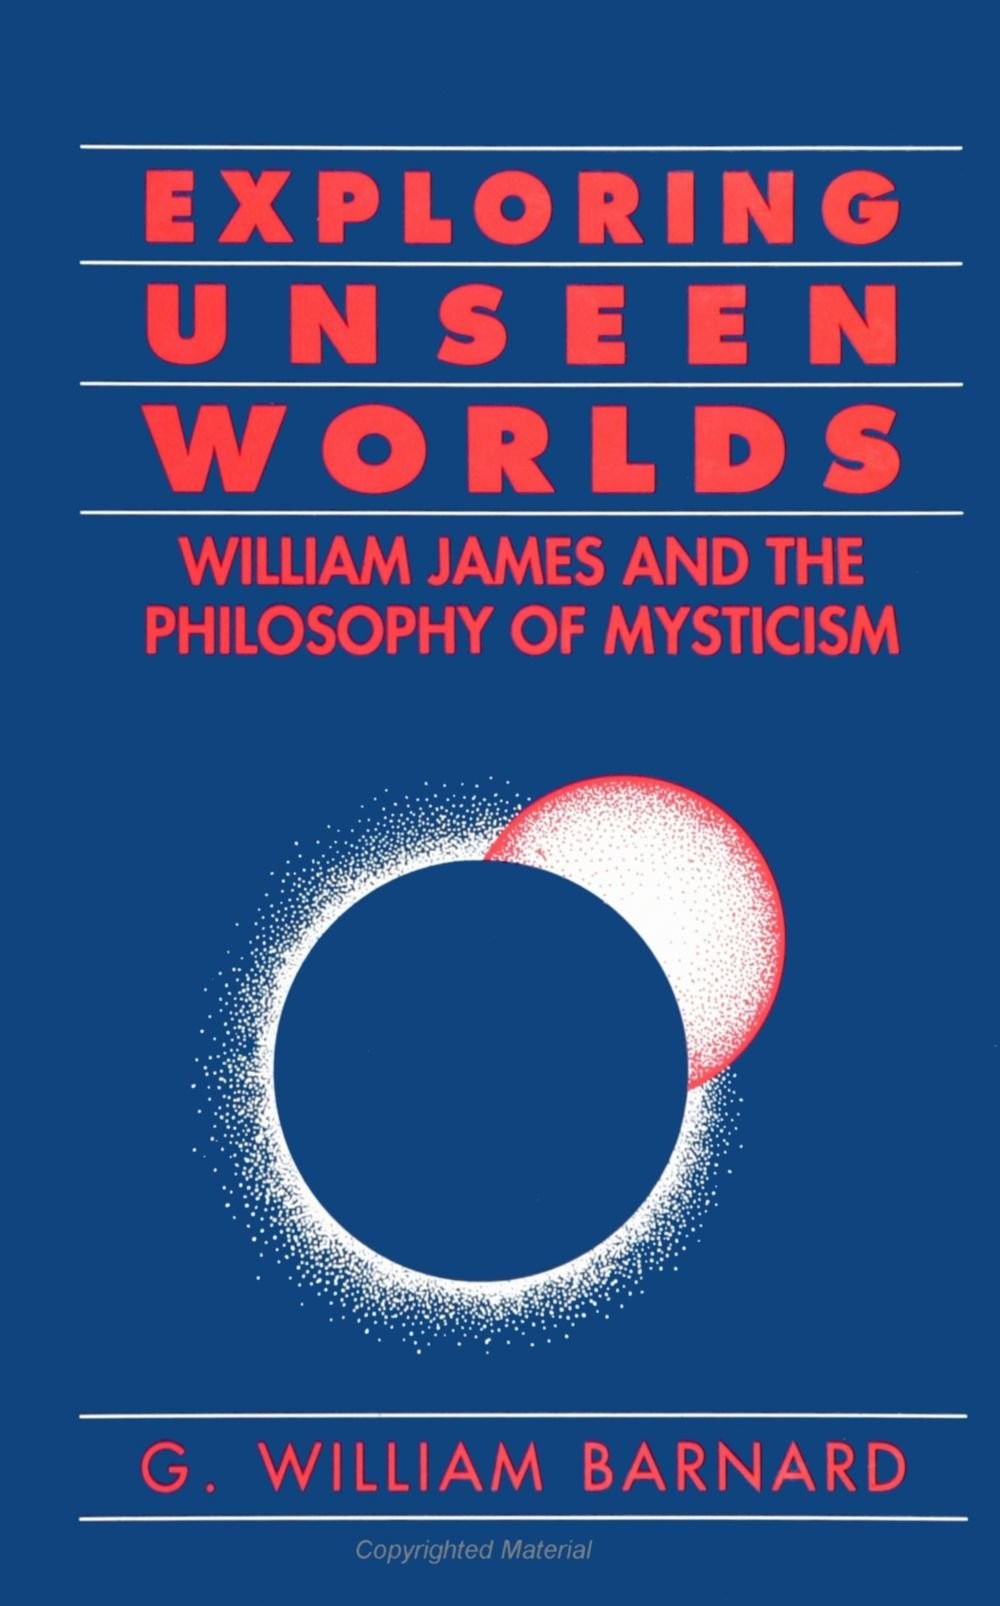 Exploring Unseen Worlds: William James and the Philosophy of Mysticism